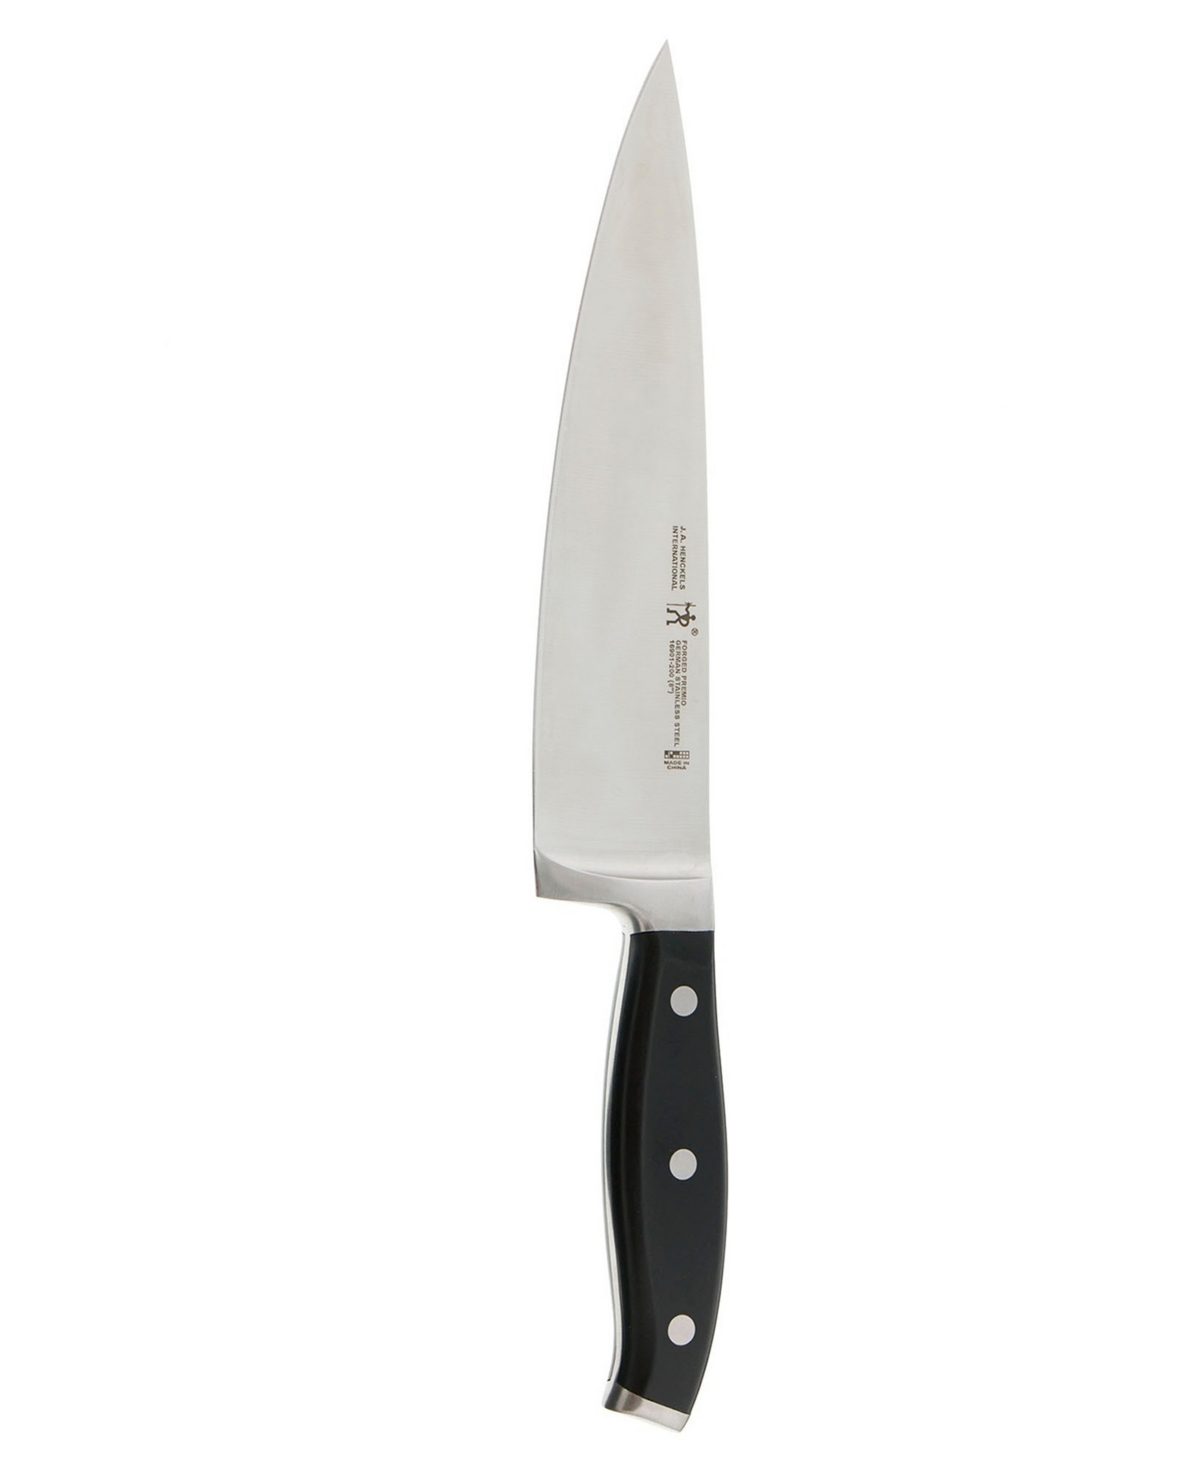 J.a. Henckels Forged Premio 8" Chef's Knife In Black